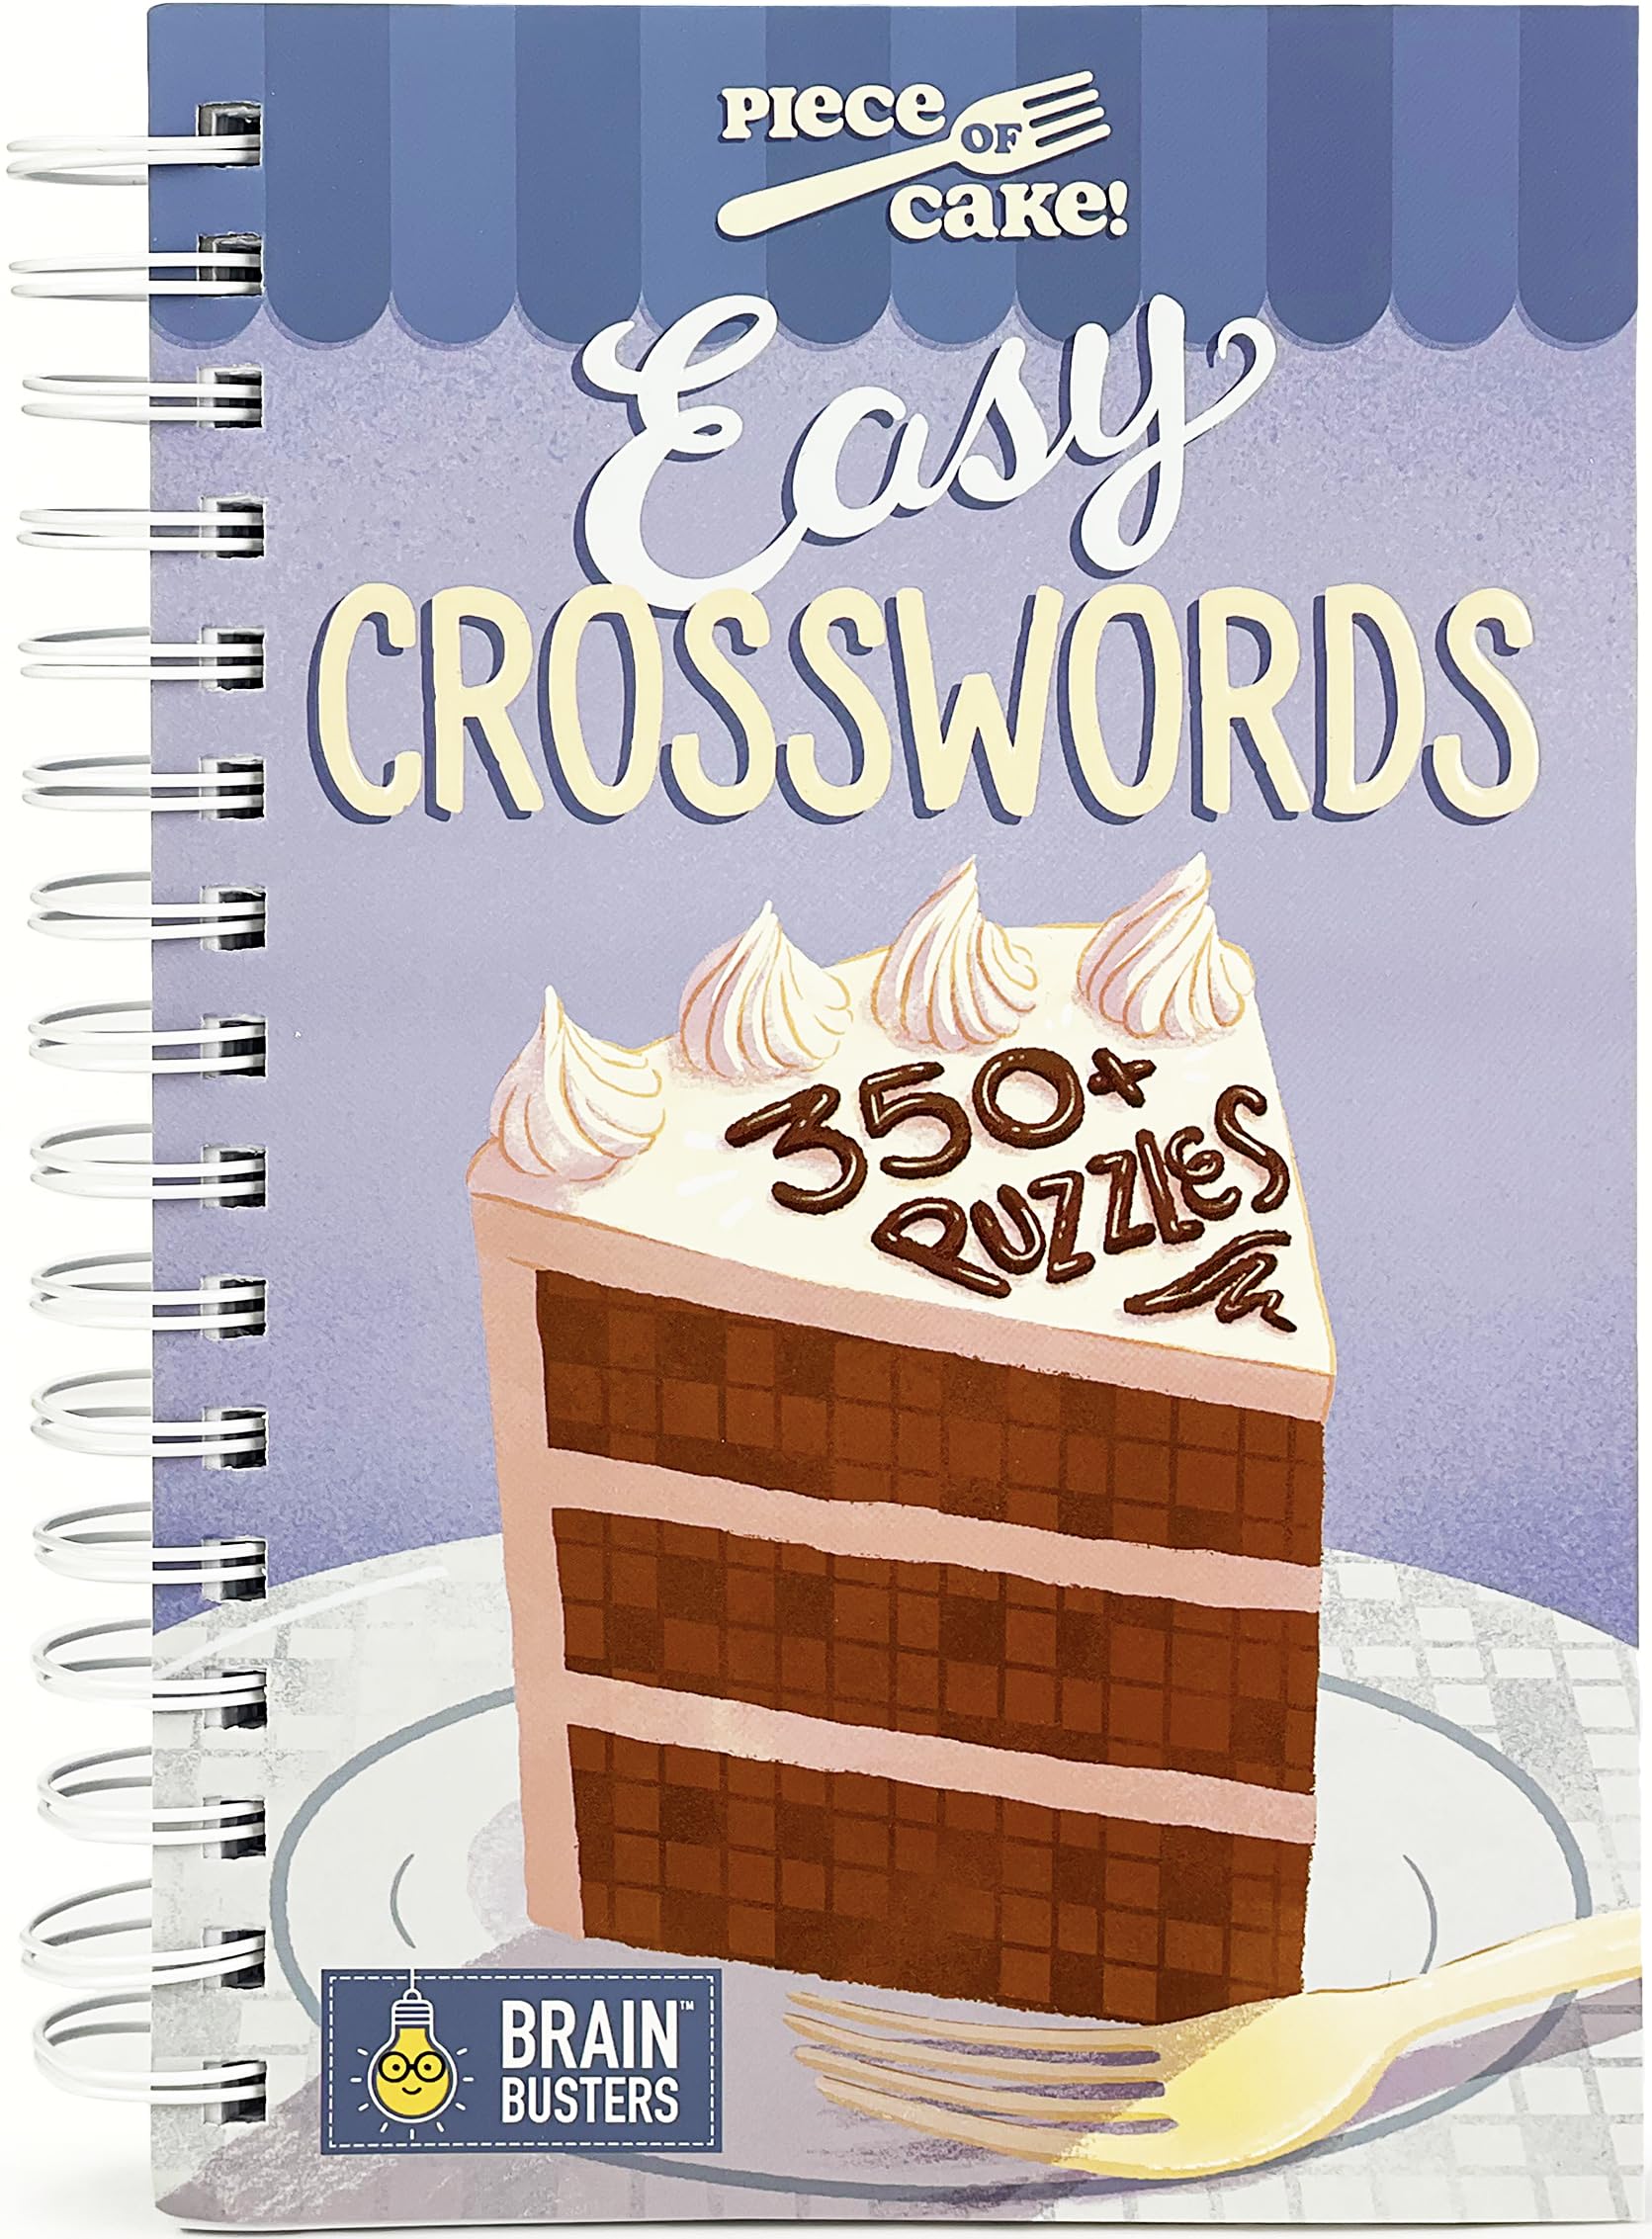 The Crossword Book by Parragon Books